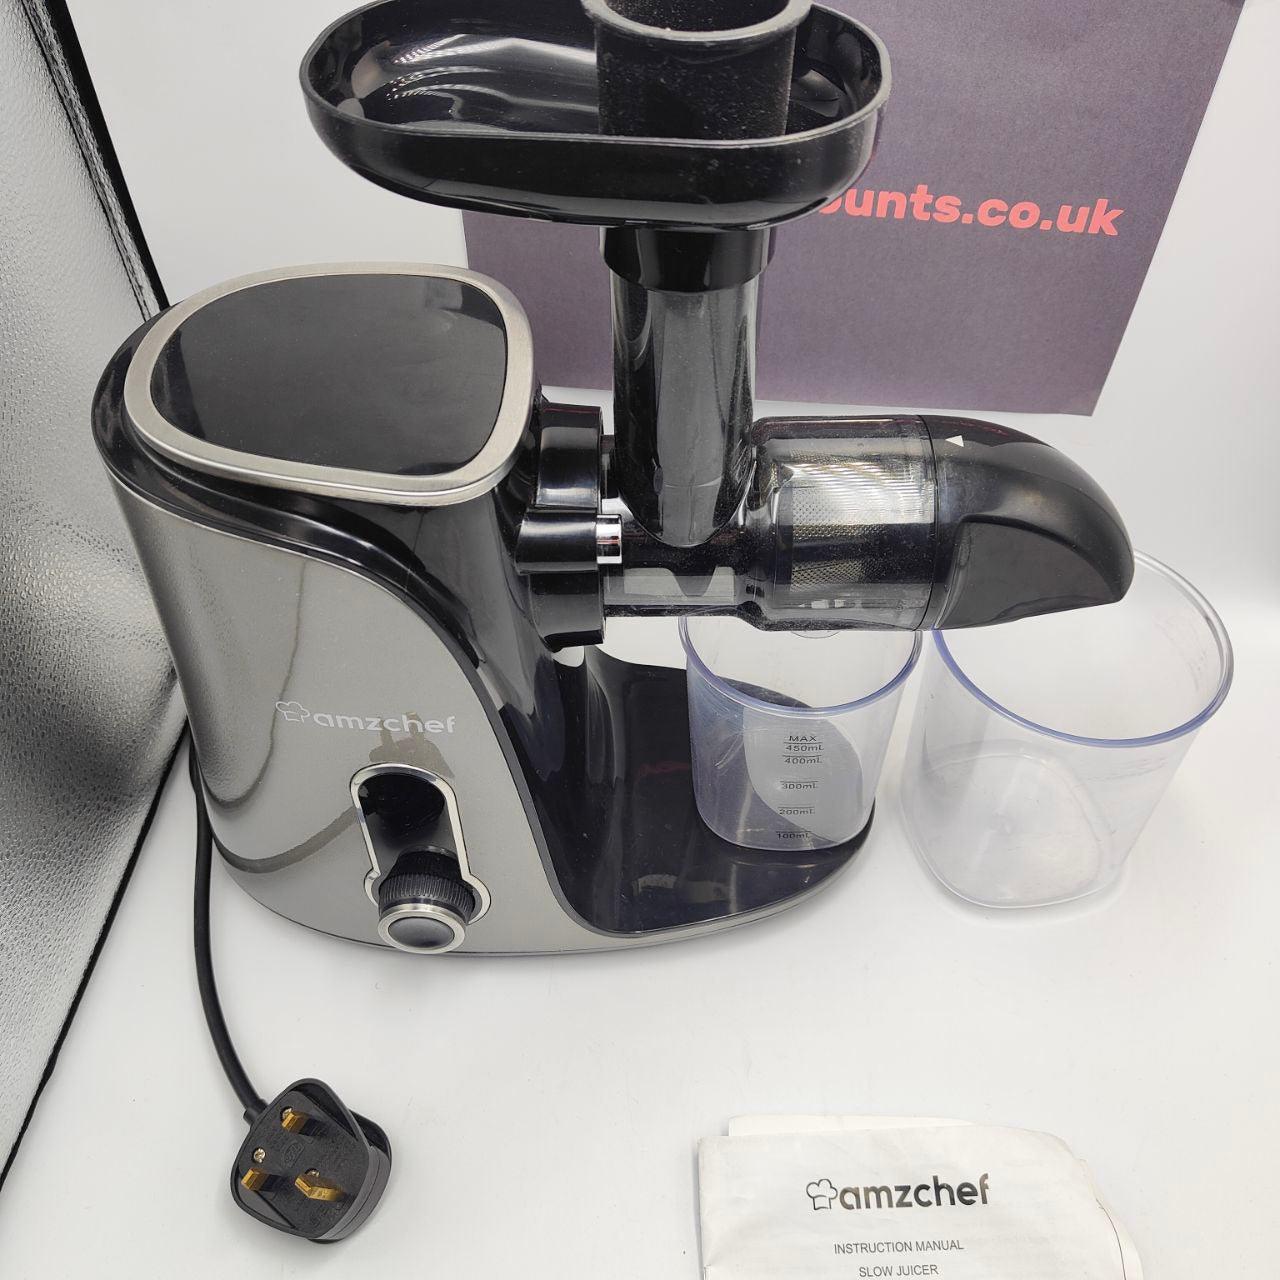 AMZCHEF Cold Press Juicer with 2 Speed Control - High Juice Yield